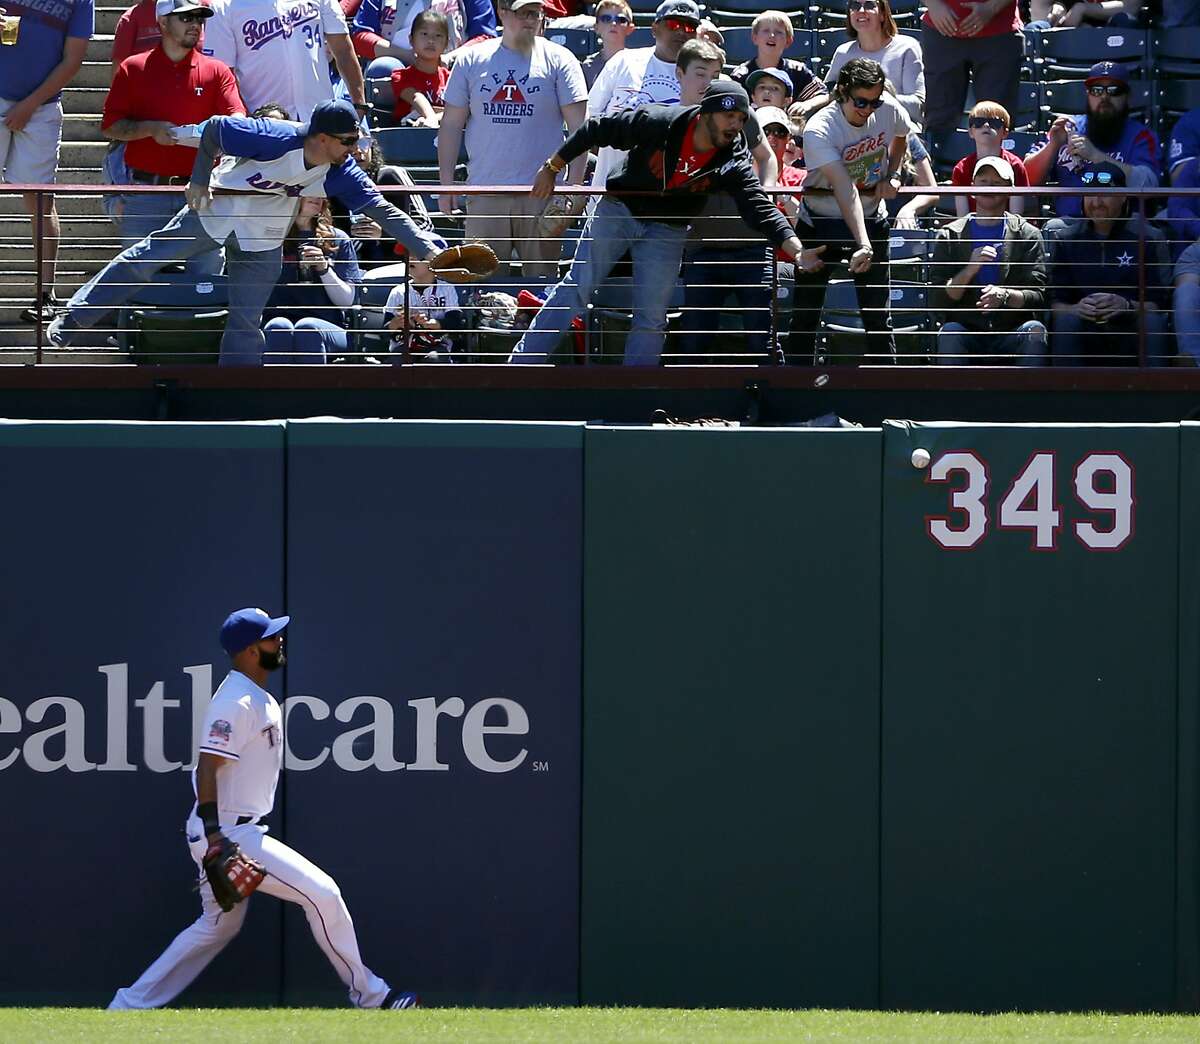 Texas Rangers right fielder Nomar Mazara watches a fans reach out for a Oakland Athletics' Khris Davis double in the first inning of a baseball game in Arlington, Texas, Sunday, April 14, 2019. (AP Photo/Tony Gutierrez)